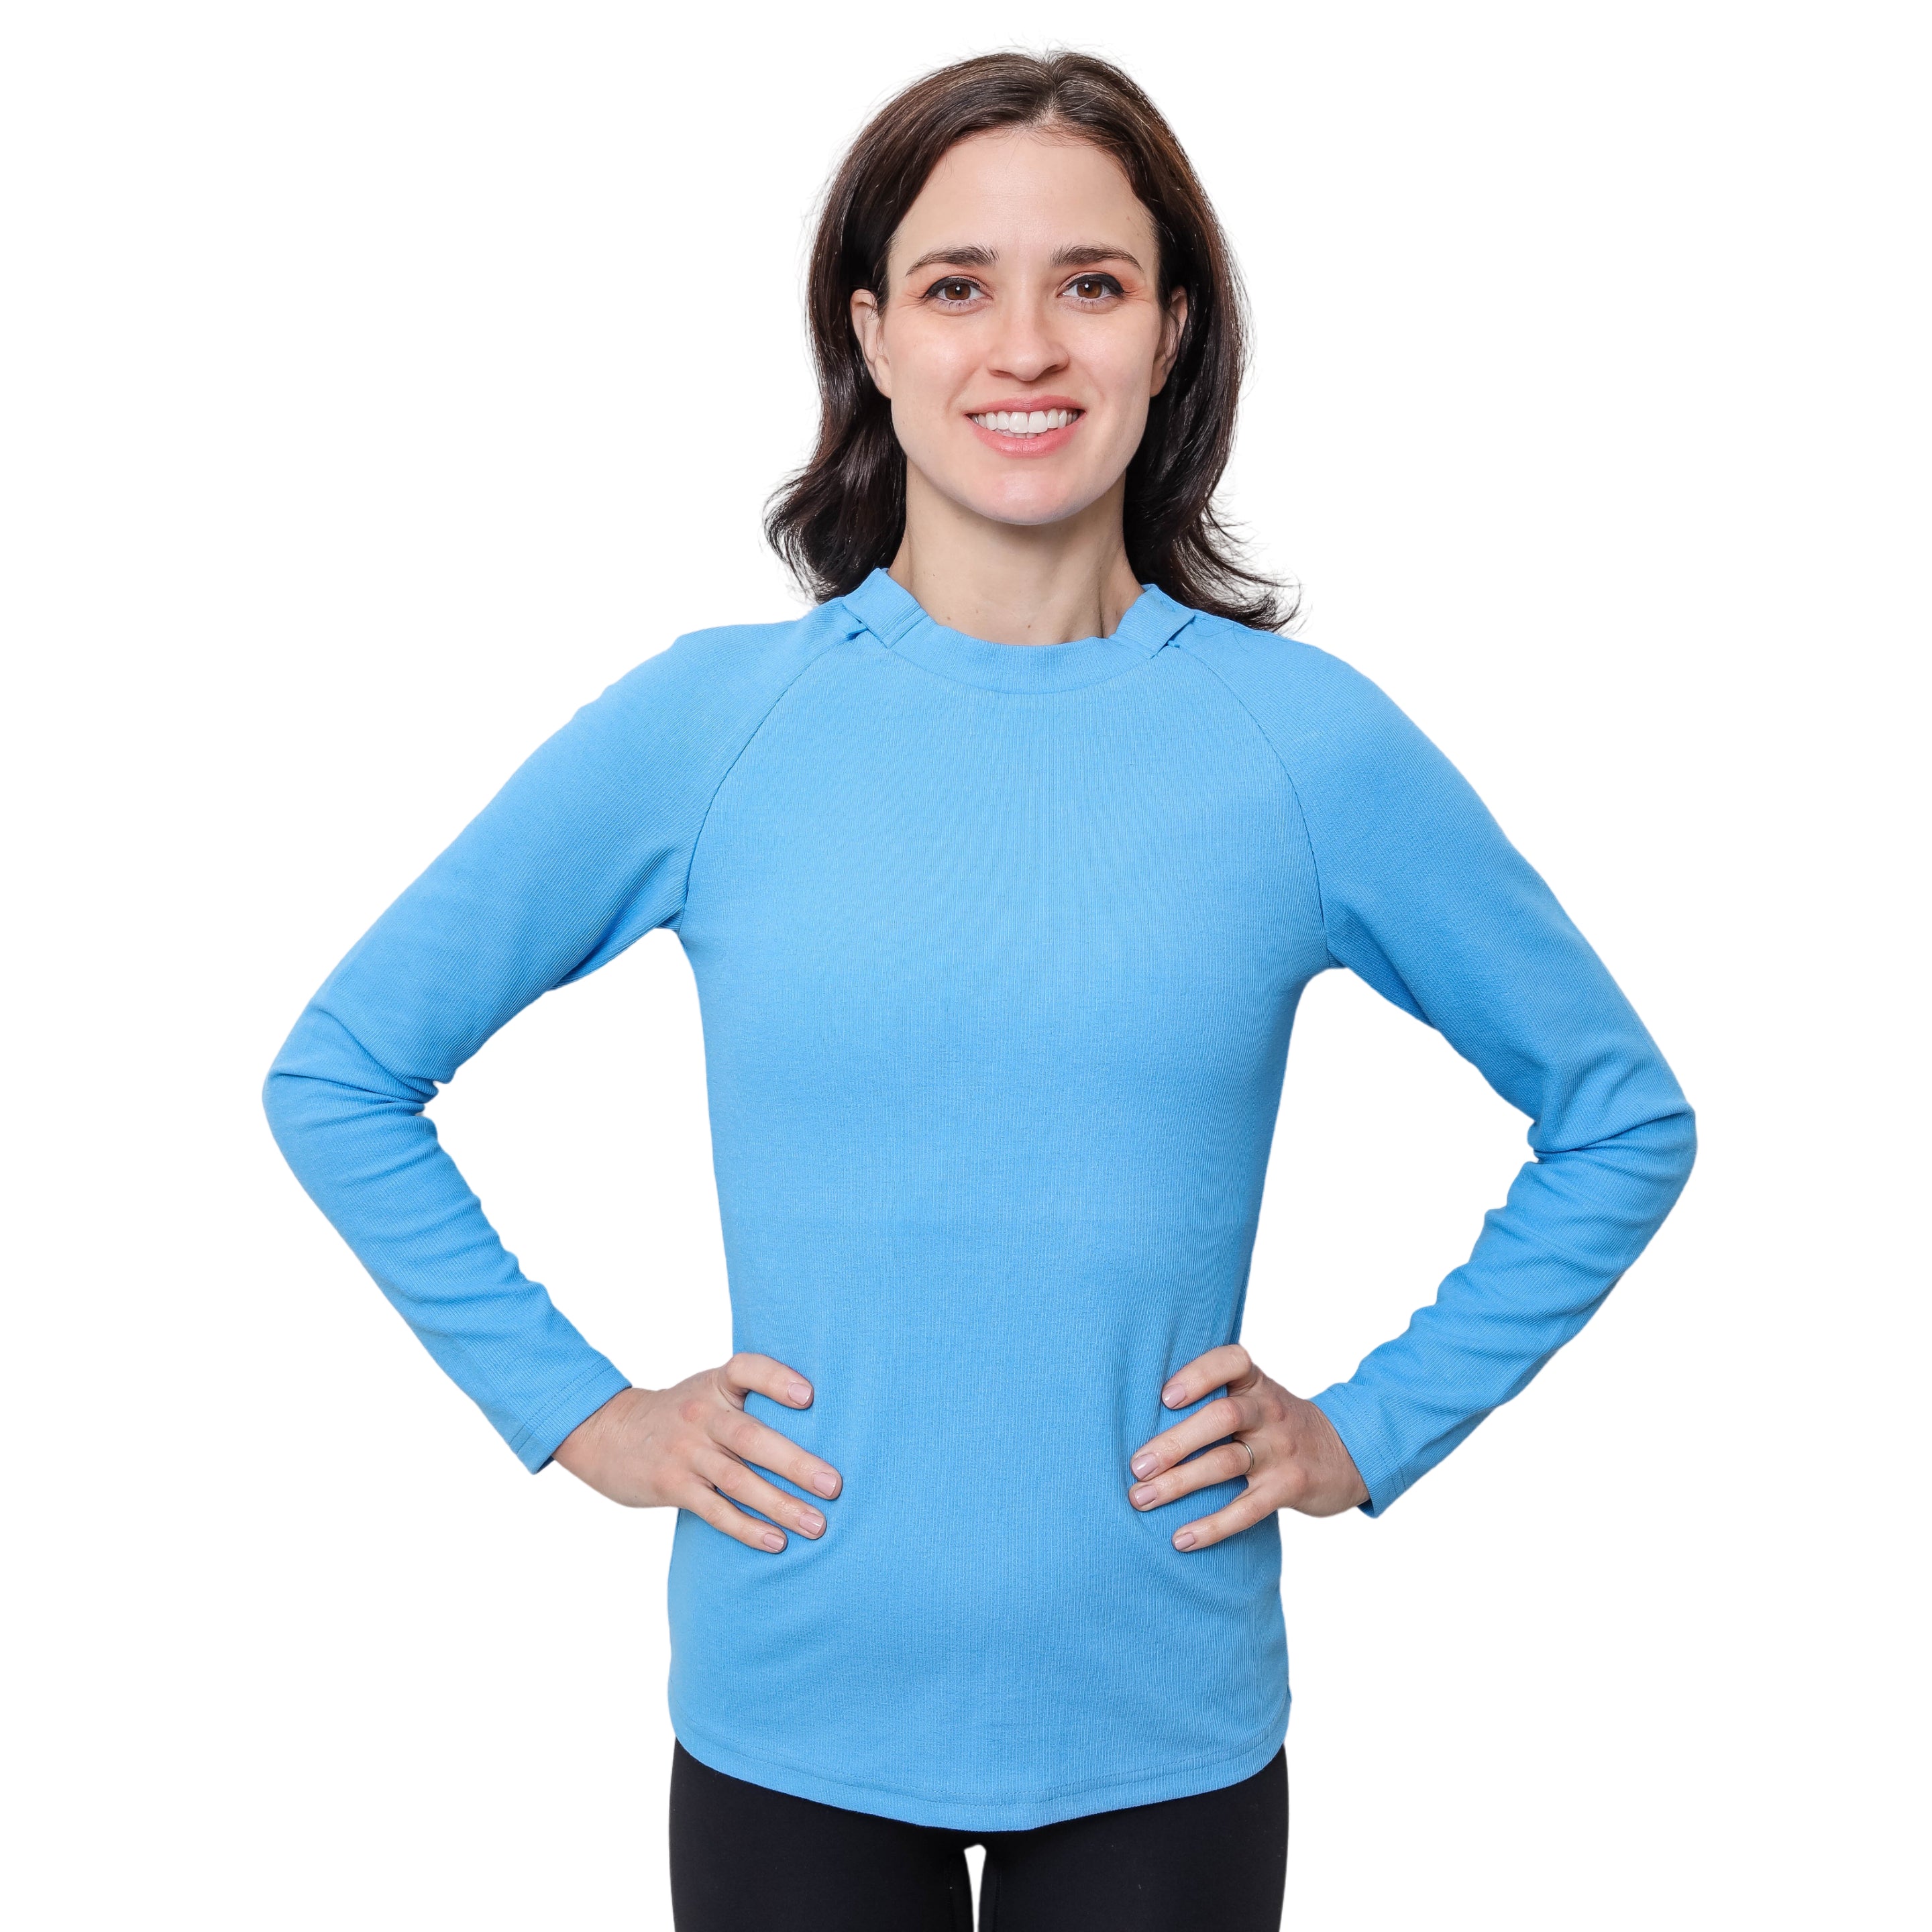 Chest Port Access Sweater